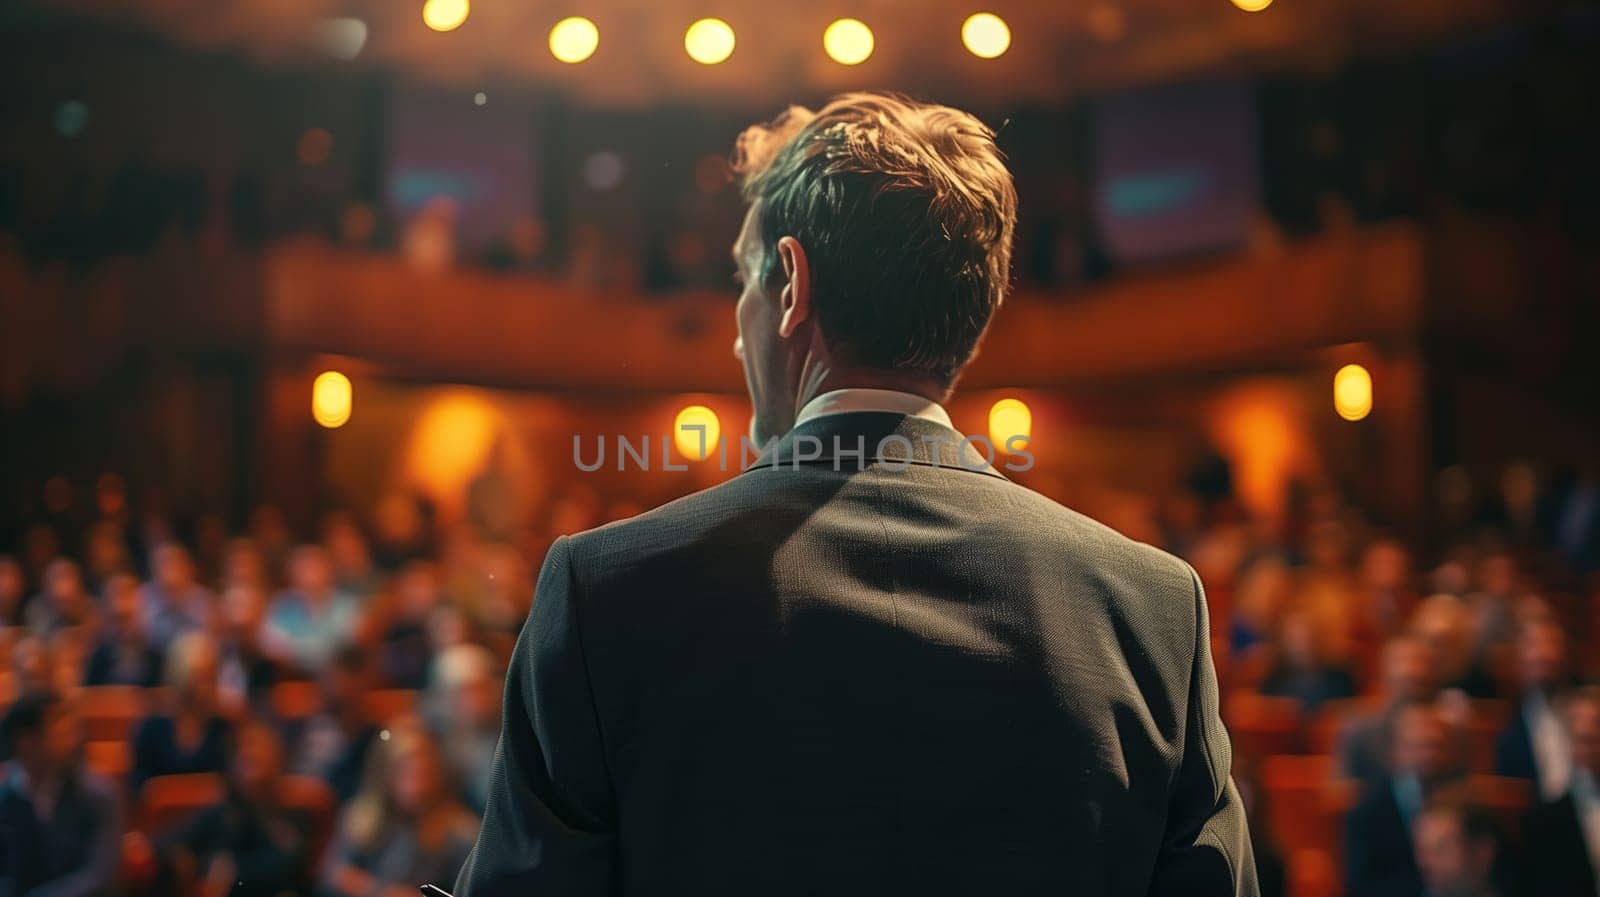 A well-dressed businessman stands with his back to the camera, addressing an attentive audience in a large conference hall. He appears confident and poised as he presents his keynote, engaging with the diverse group of professionals gathered for the event.